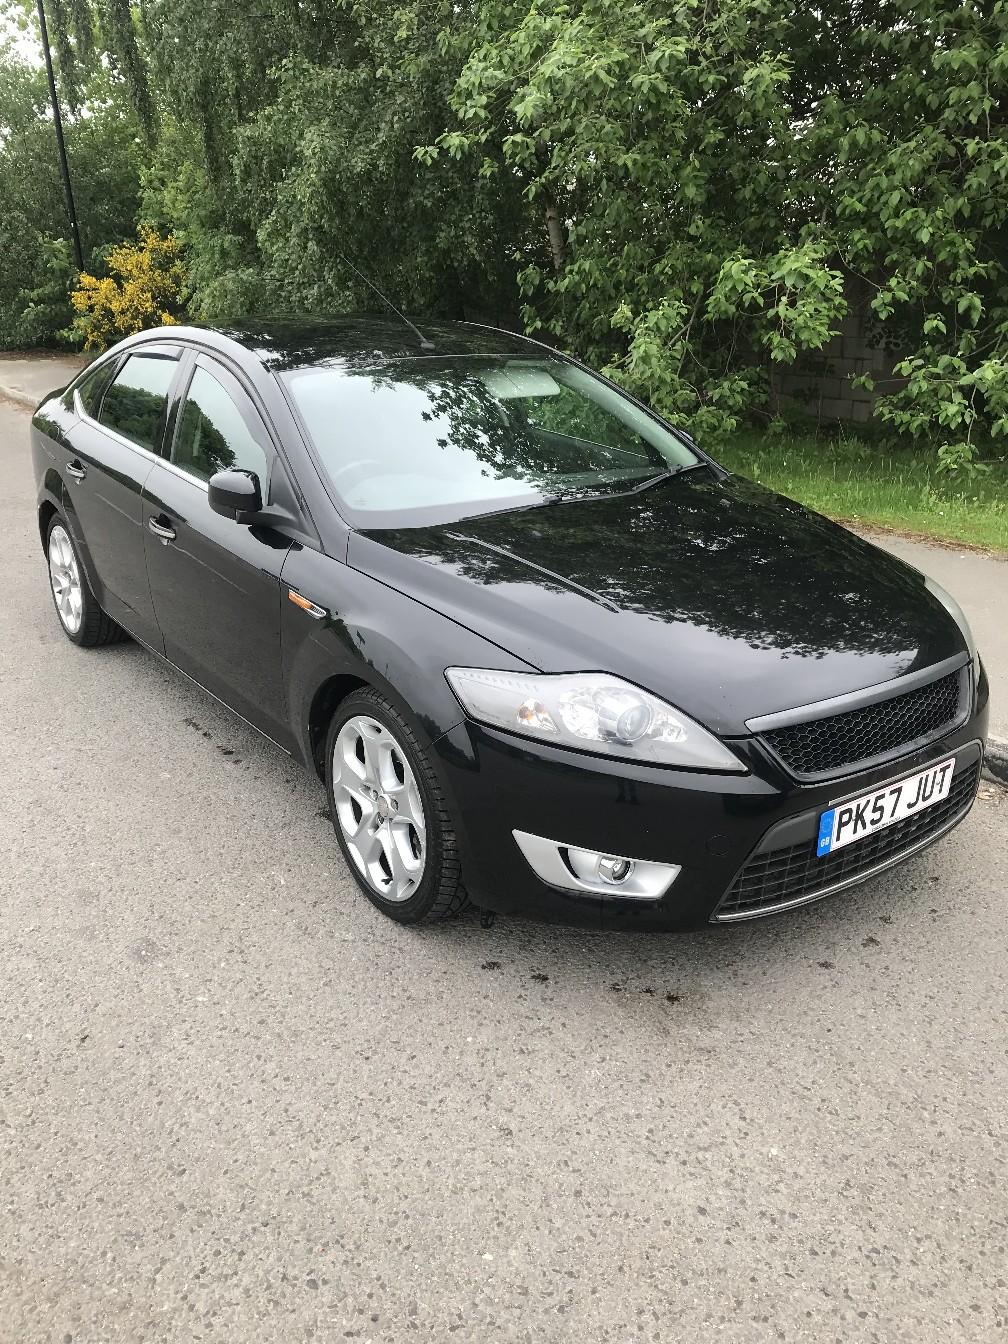 Ford mondeo Mk4 2.0 tdci in Barnsley for £1,800.00 for